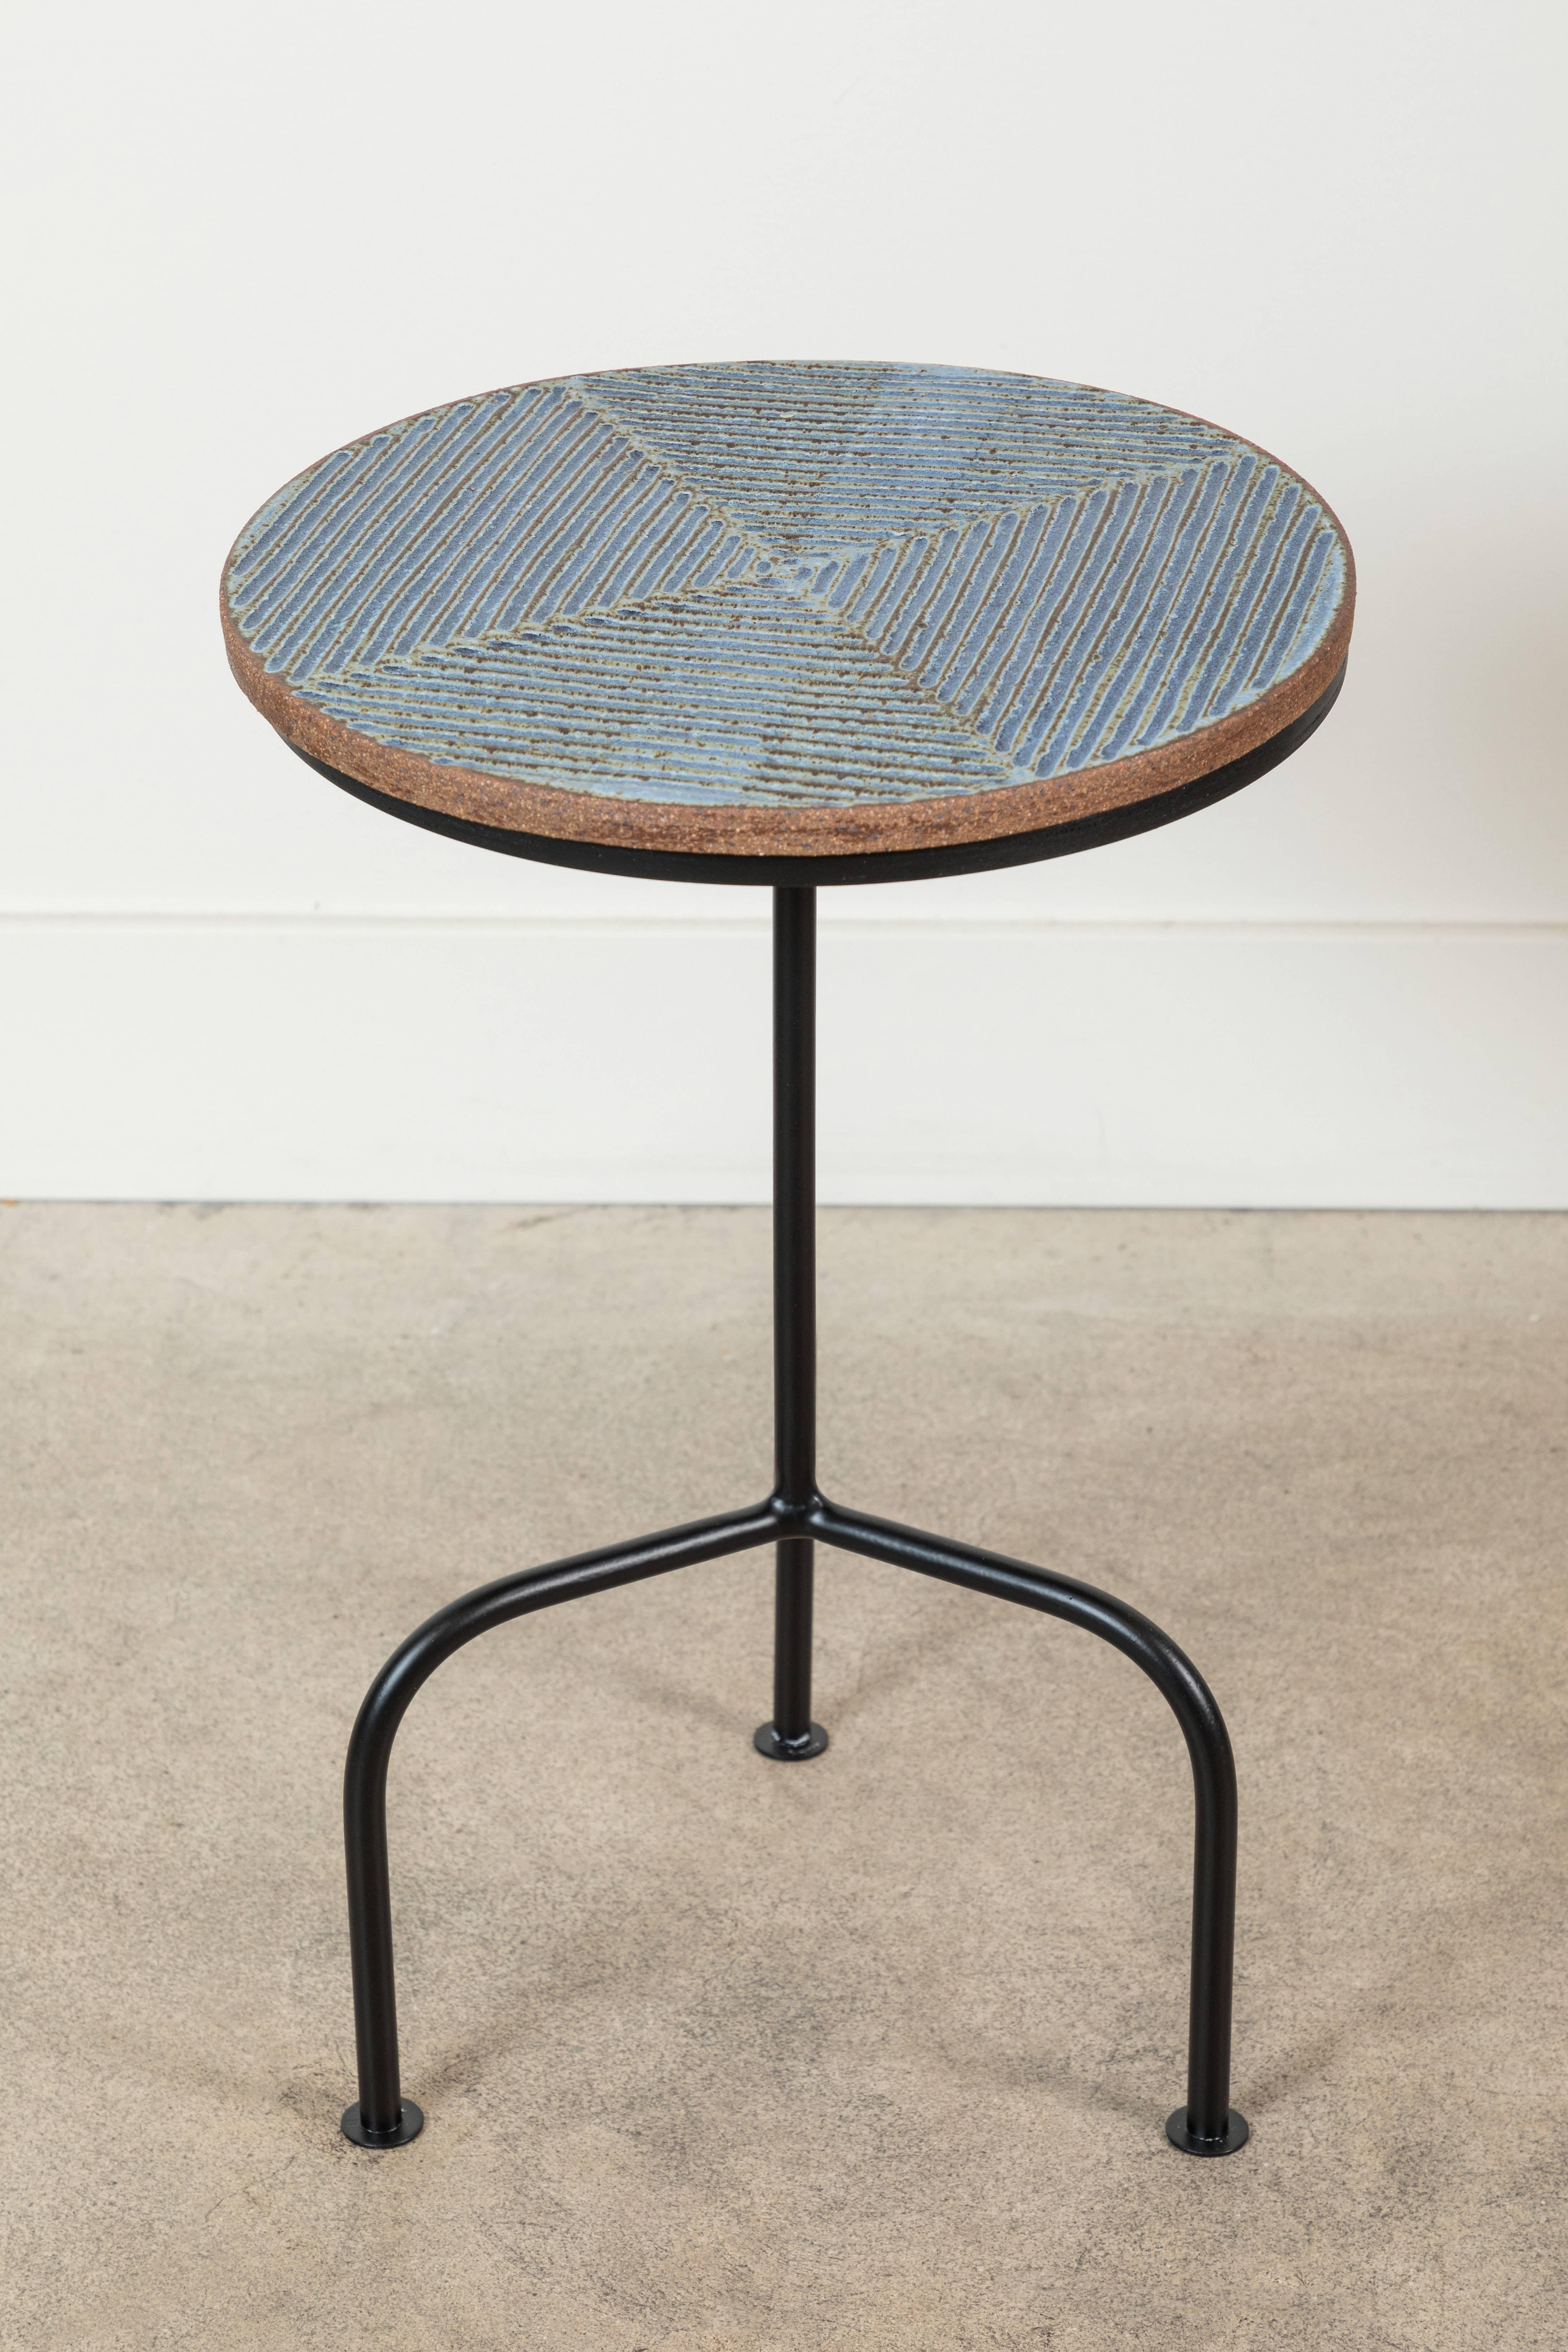 Steel and ceramic side table by Mt. Washington Pottery for Lawson-Fenning

